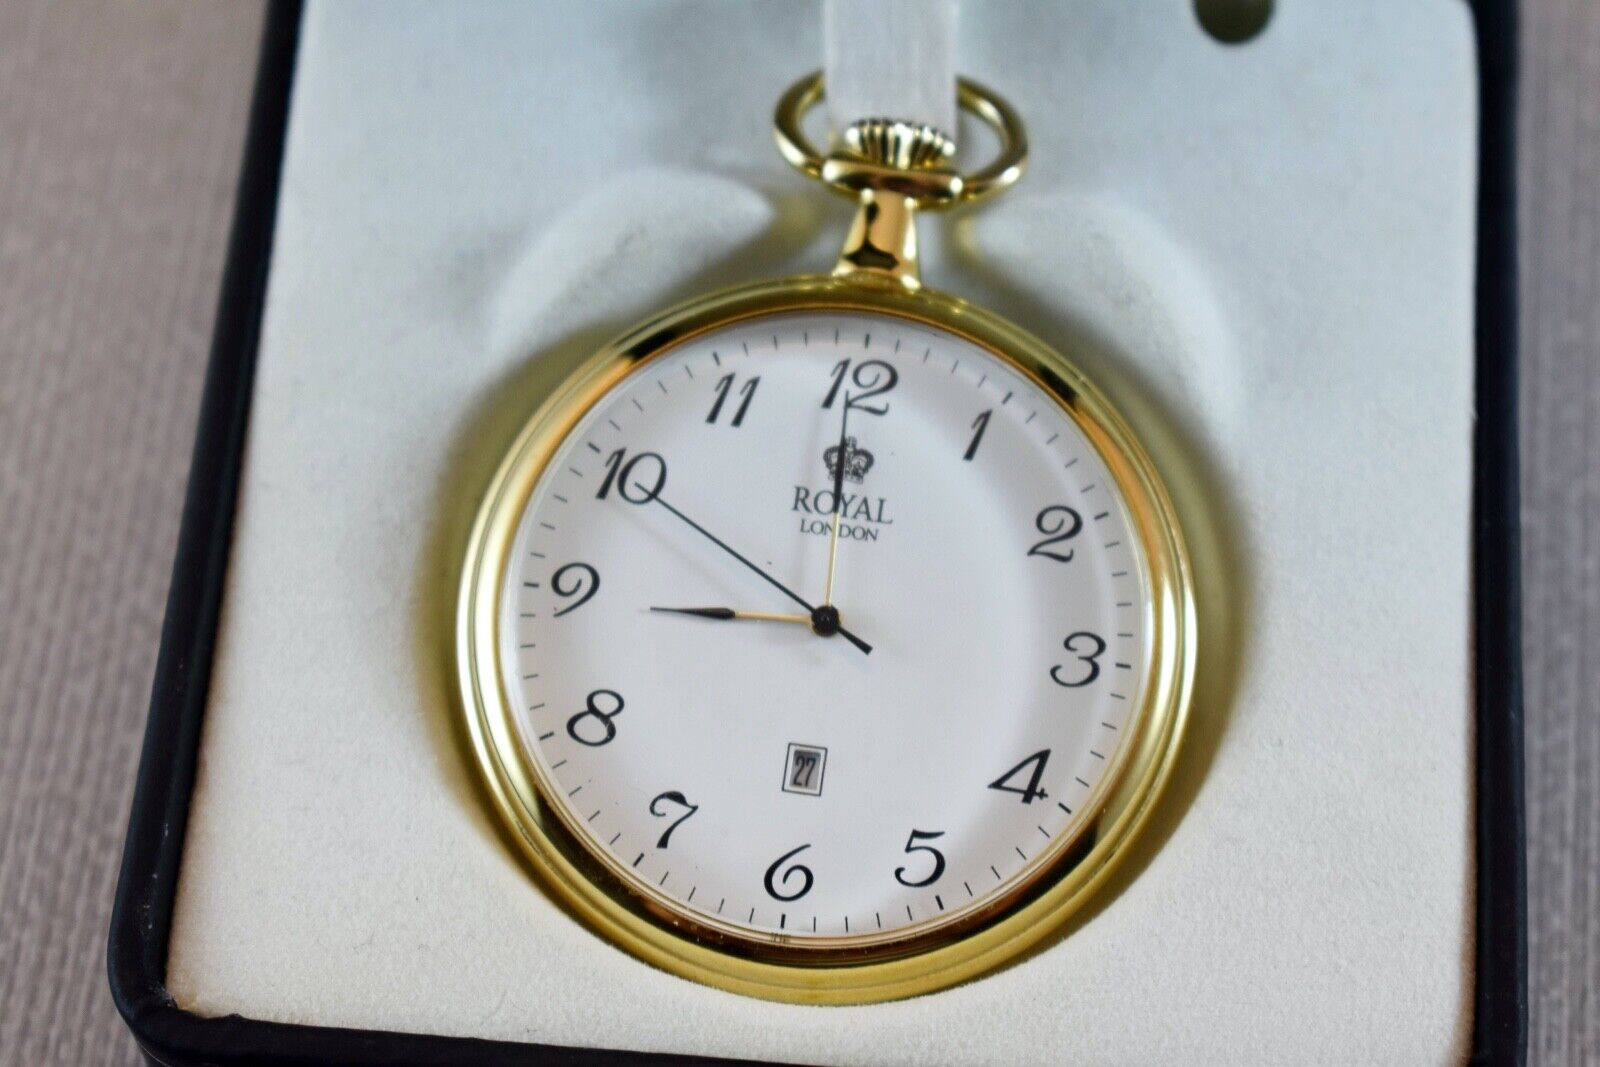 ROYAL LONDON QUARTZ POCKET WATCH BOXED AND WORKING